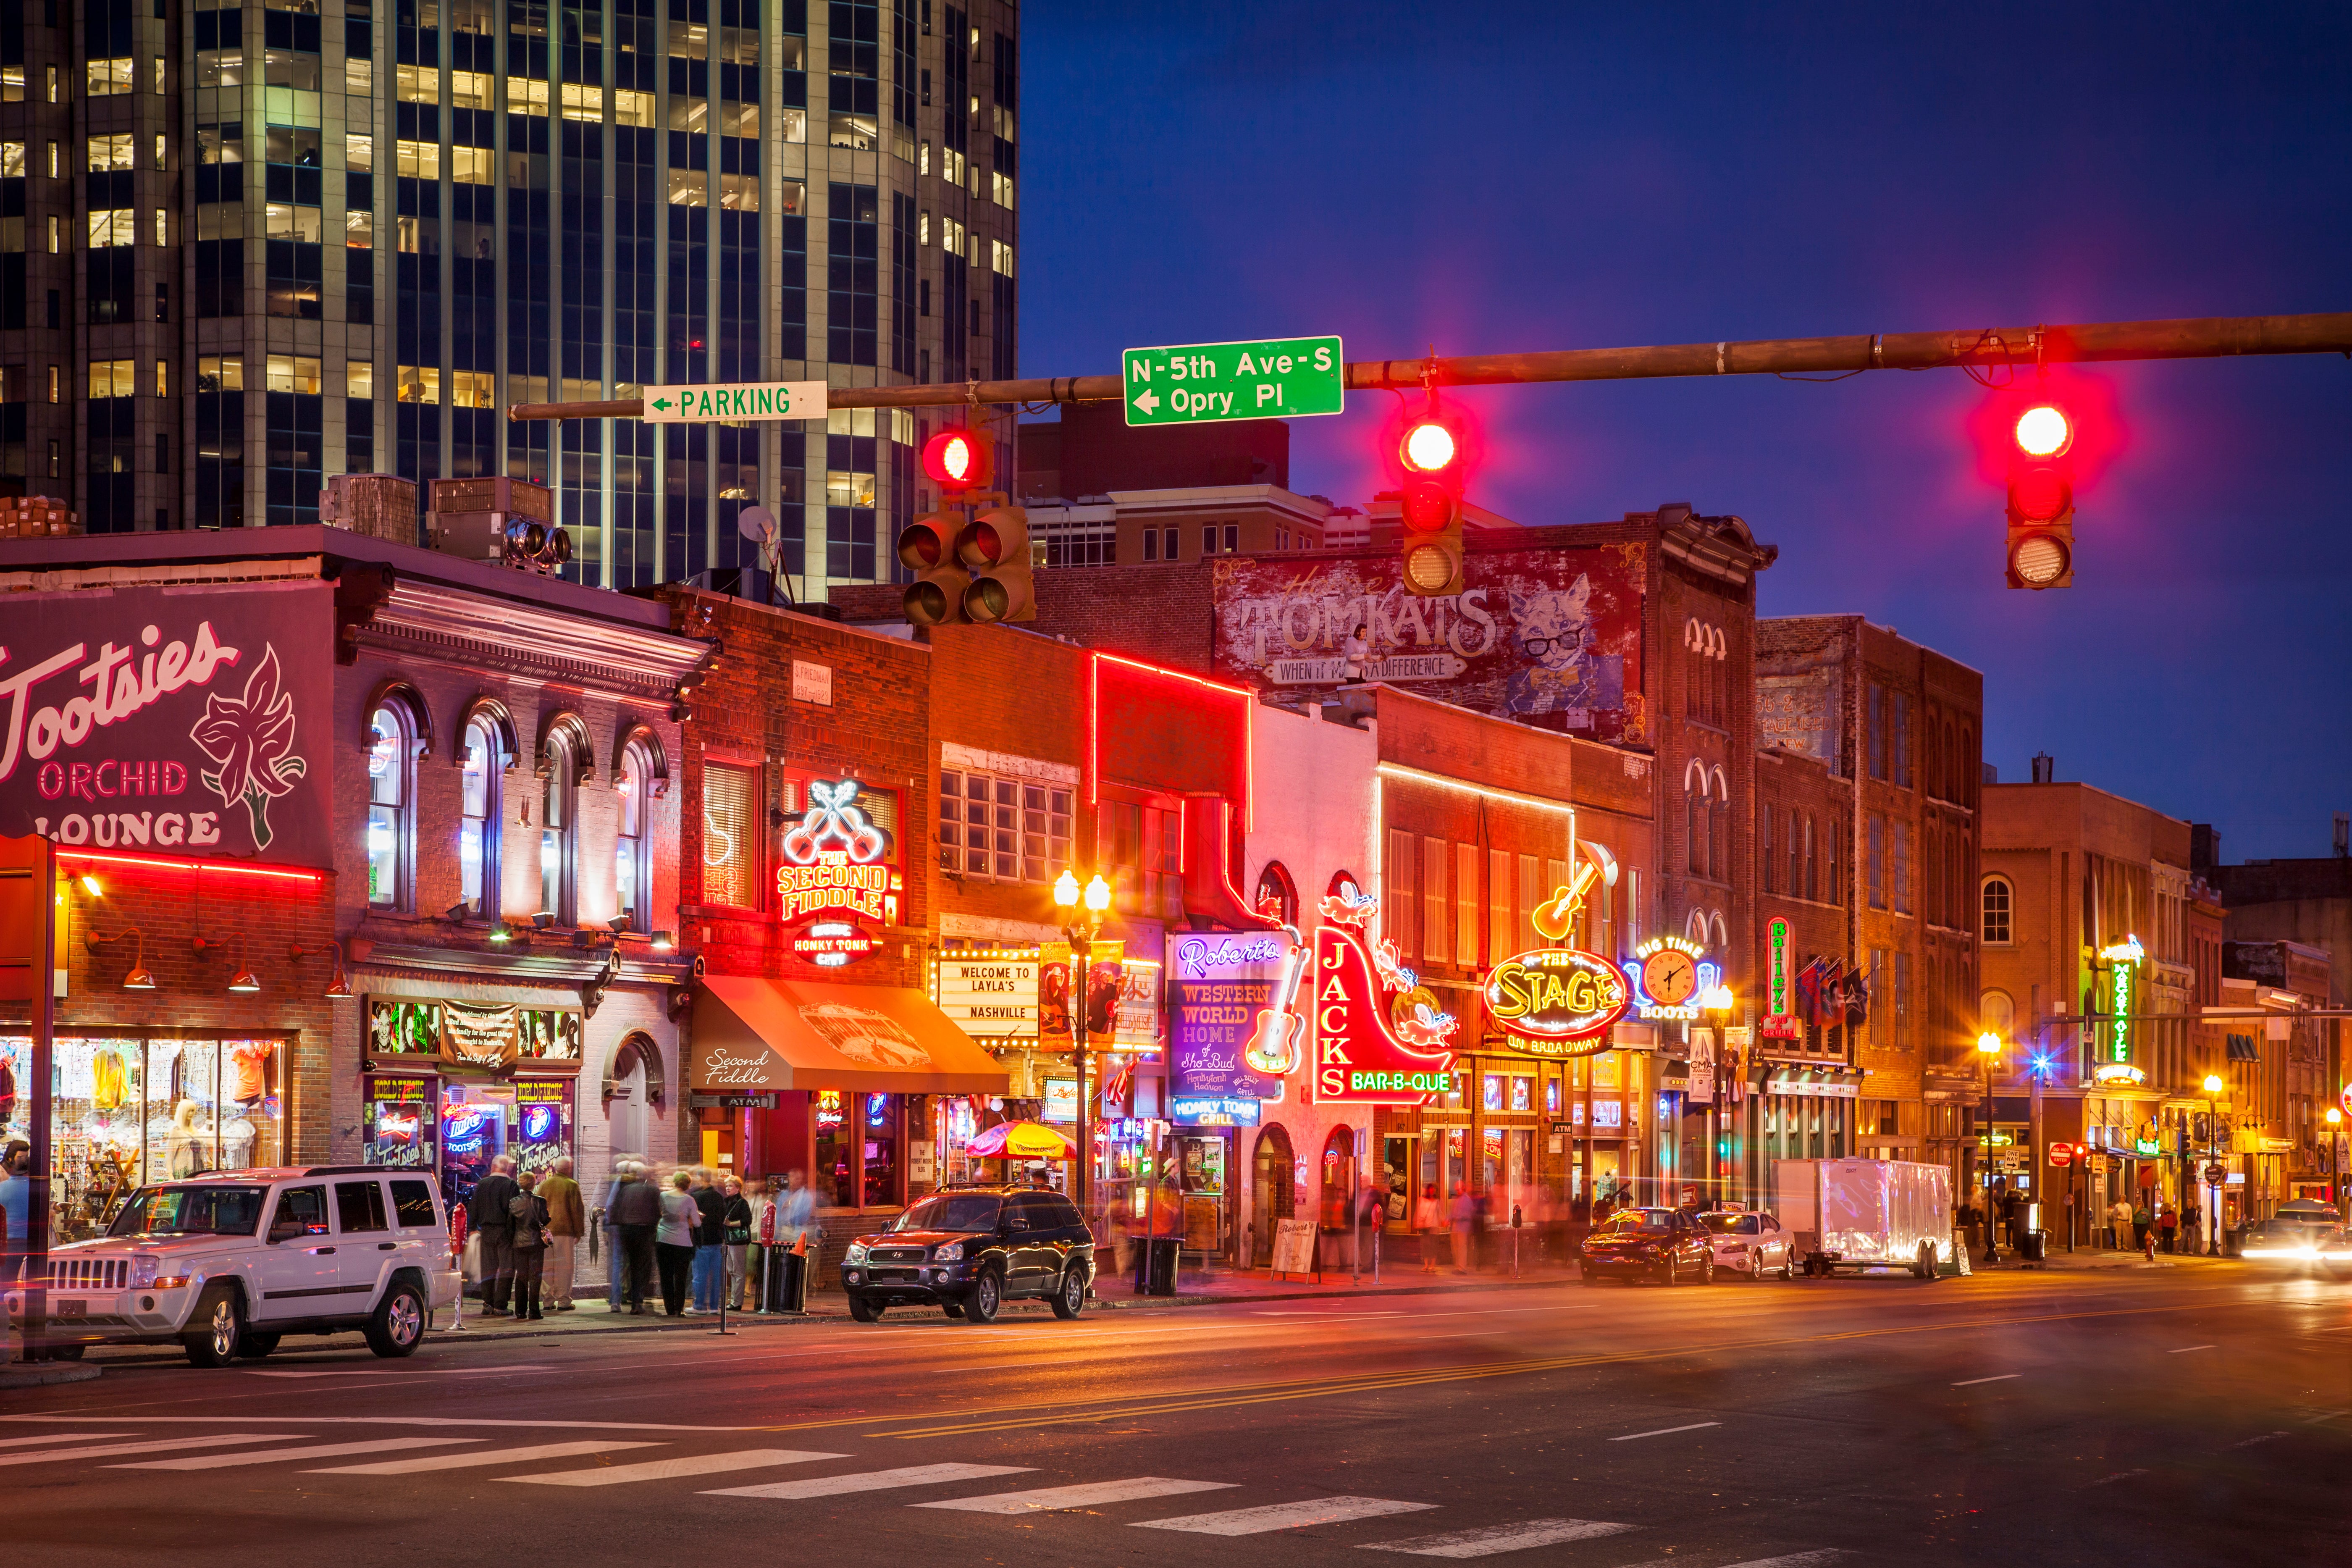 How To Have a Lit Weekend in Nashville
